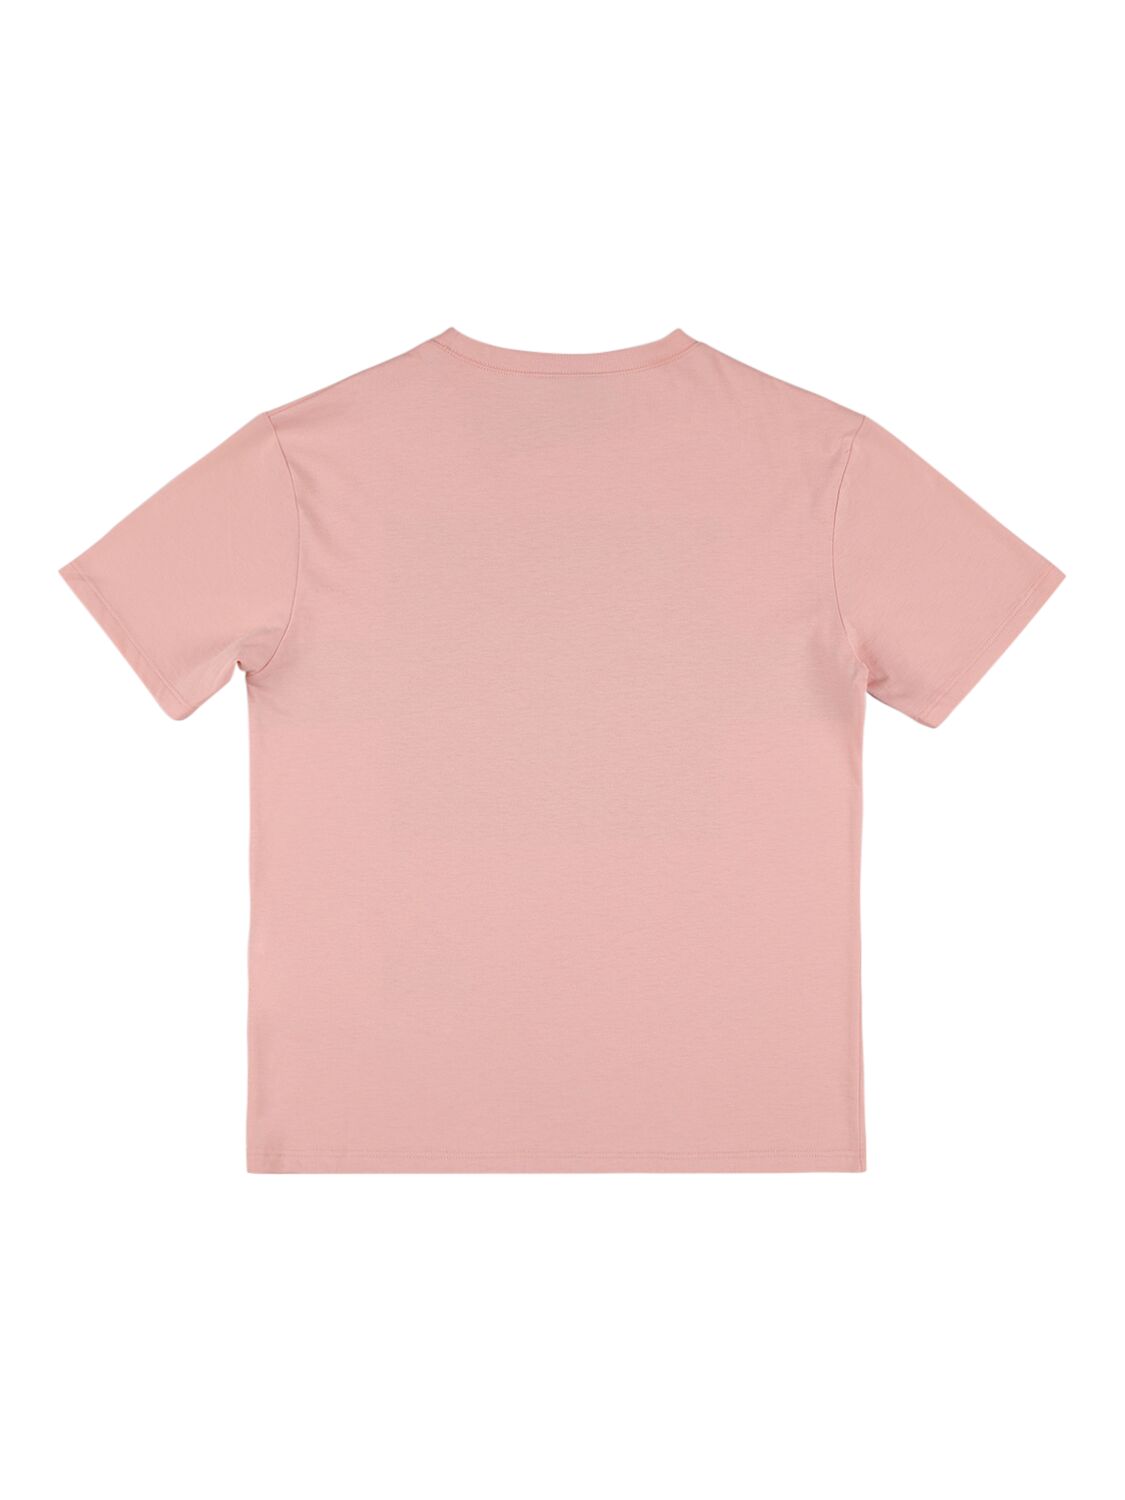 Shop Gucci Cotton Jersey T-shirt In Pink,sky